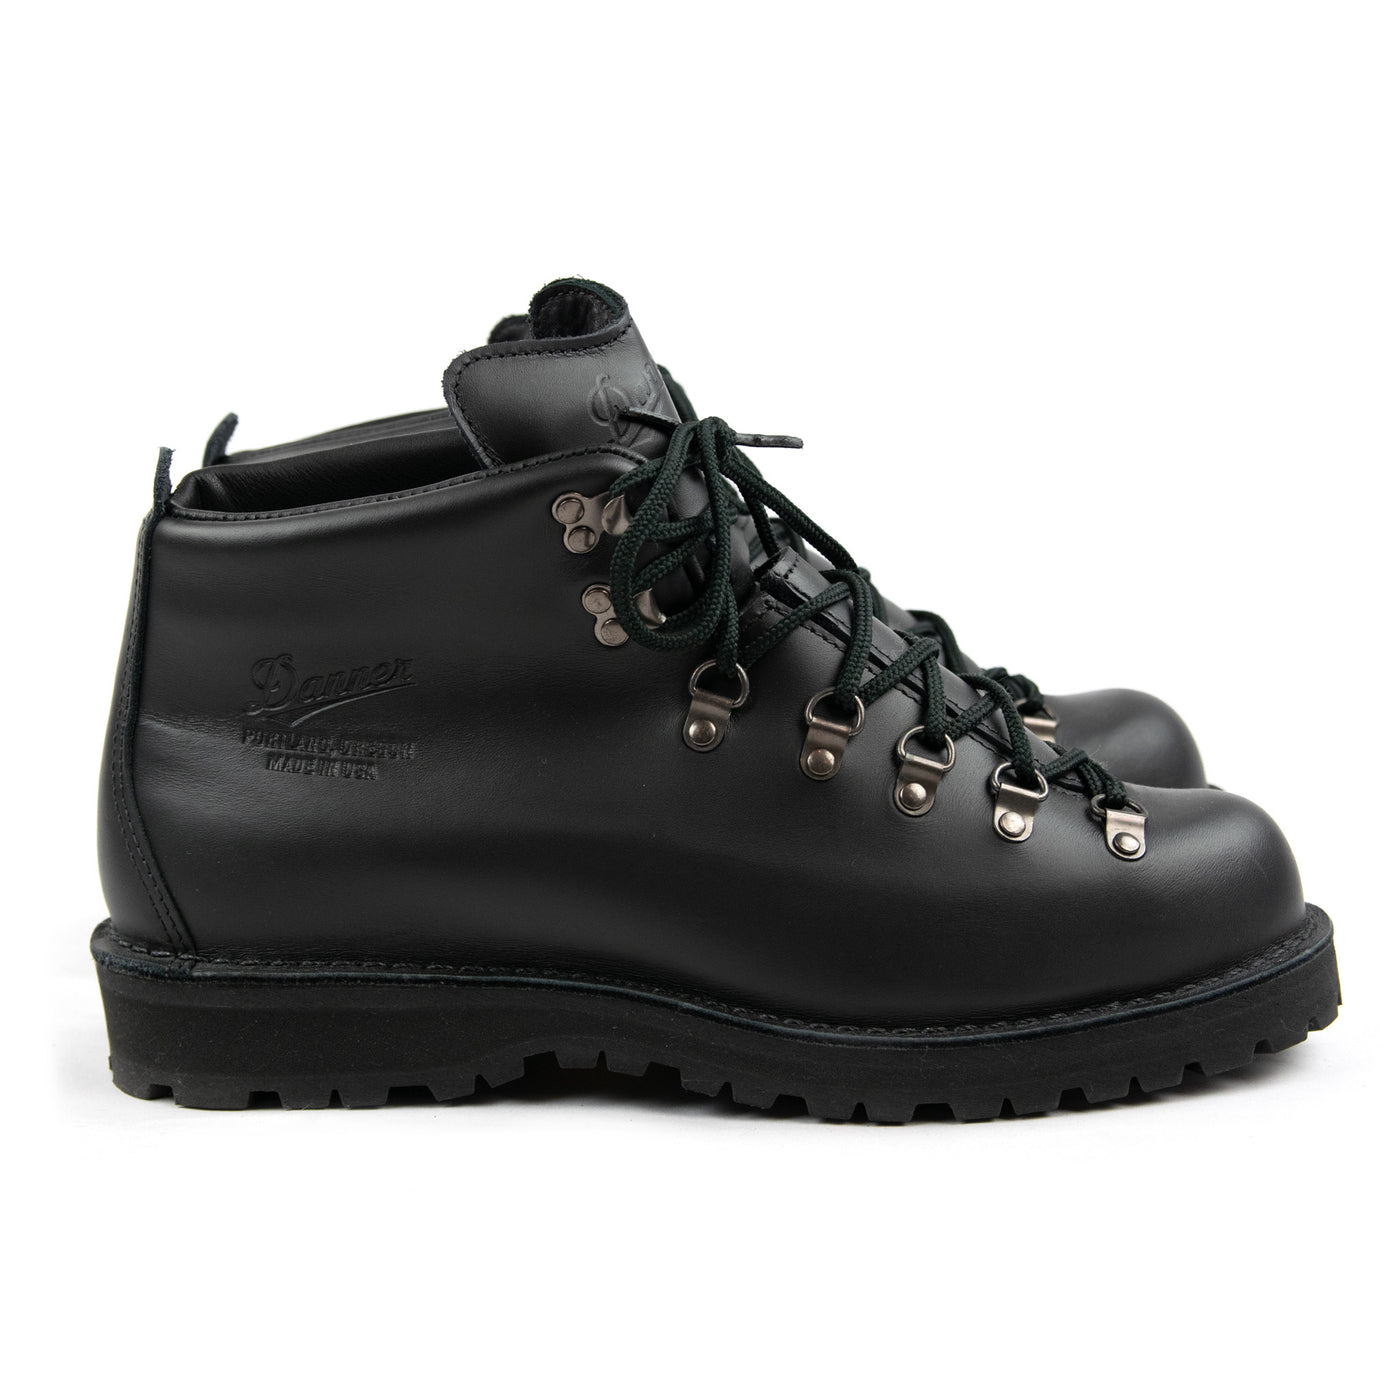 Danner Mountain Light Gore-Tex Leather Boot Black 31530 Side